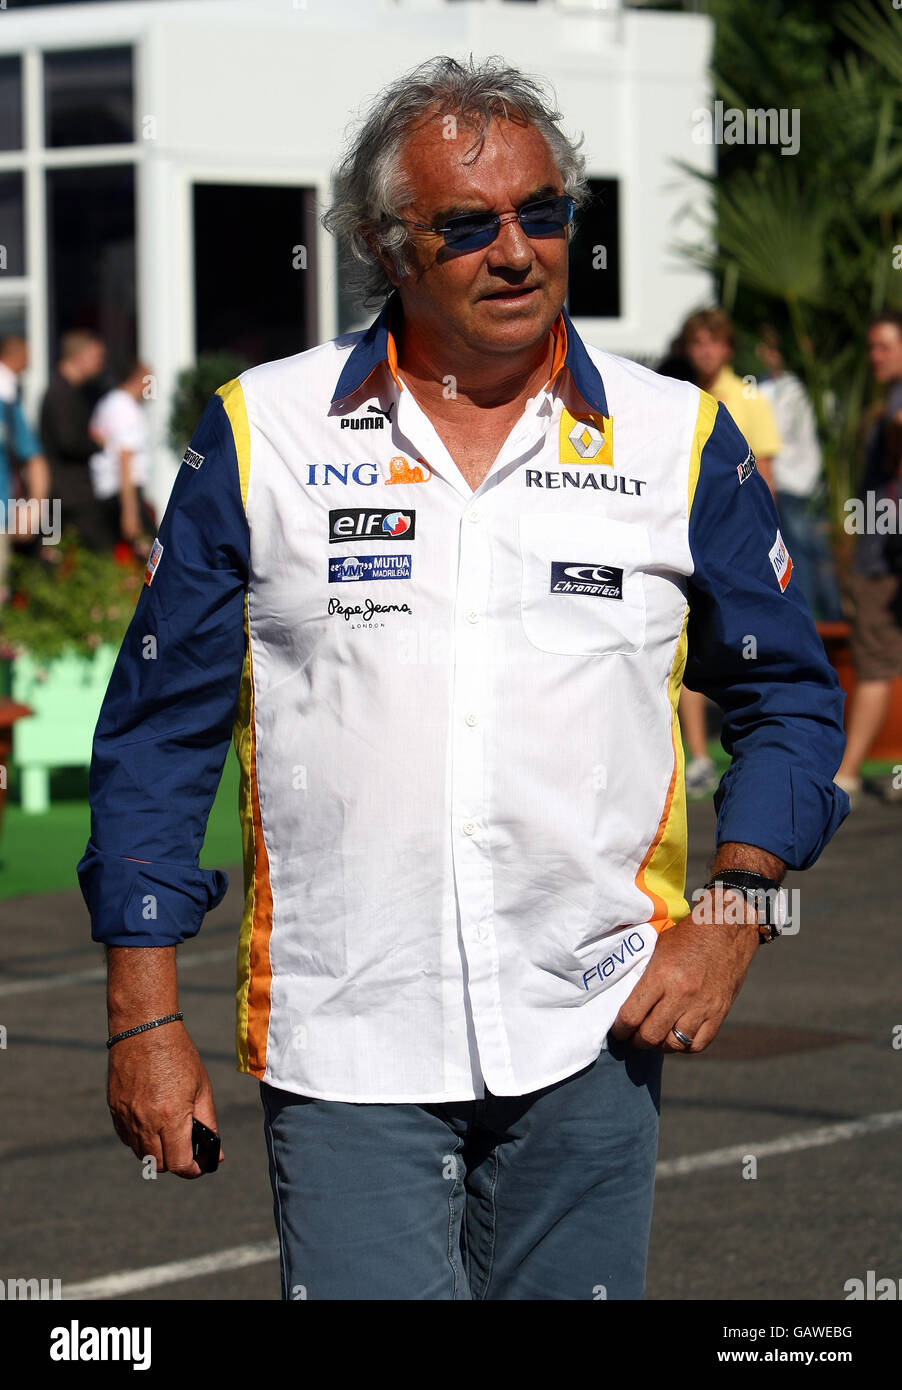 Formula One Motor Racing - French Grand Prix - Qualifying - Magny Cours. Flavio Briatore - Renault Managing Director during the Grand Prix at Magny-Cours, Nevers, France. Stock Photo